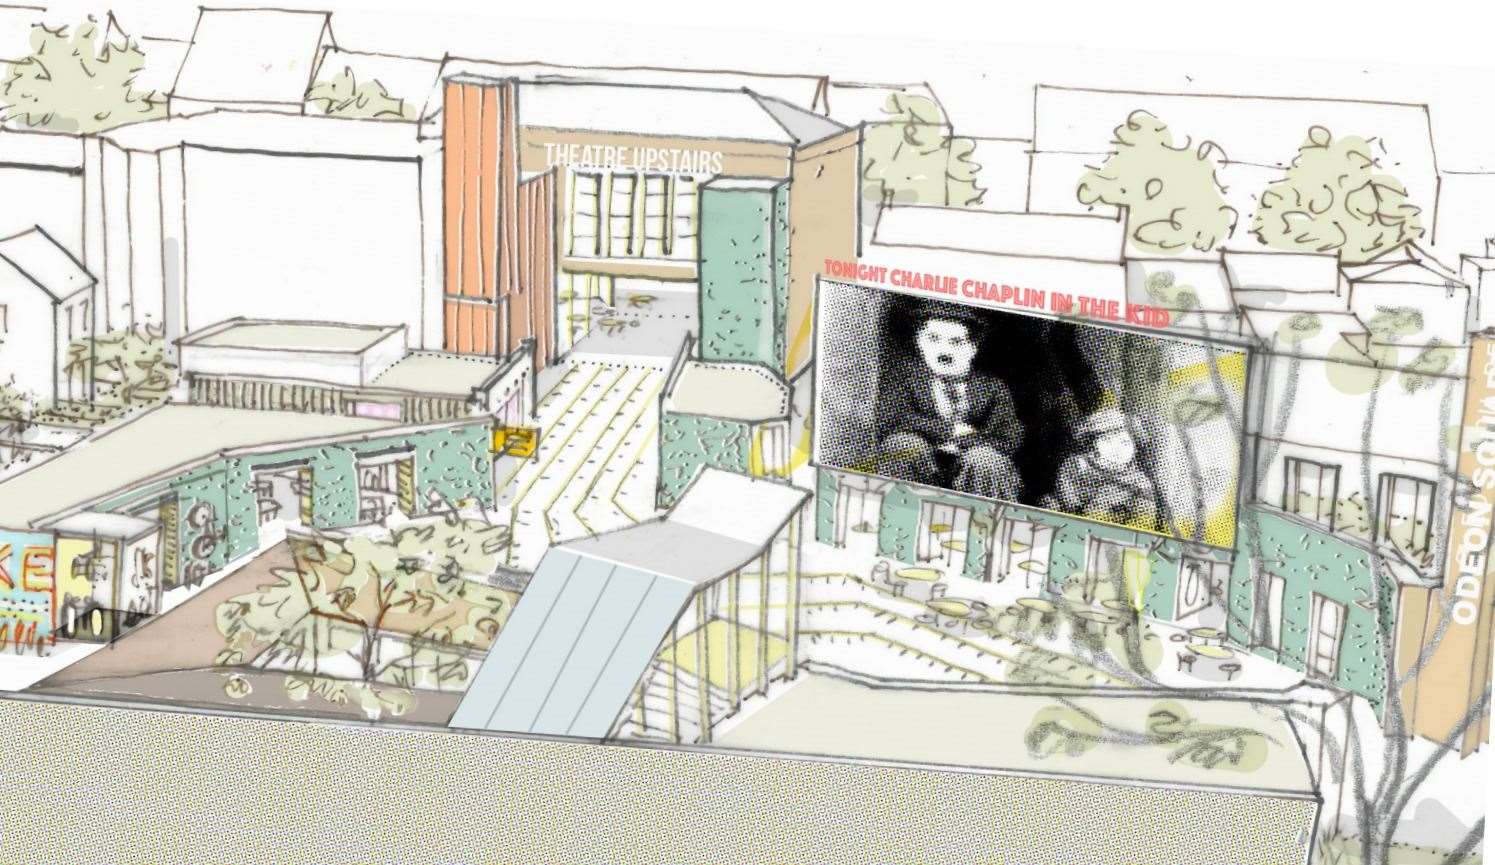 This drawing, released in early 2019, showed ABC's early plans for the Mecca Bingo site and Vicarage Lane car park, featuring an outdoor cinema screen